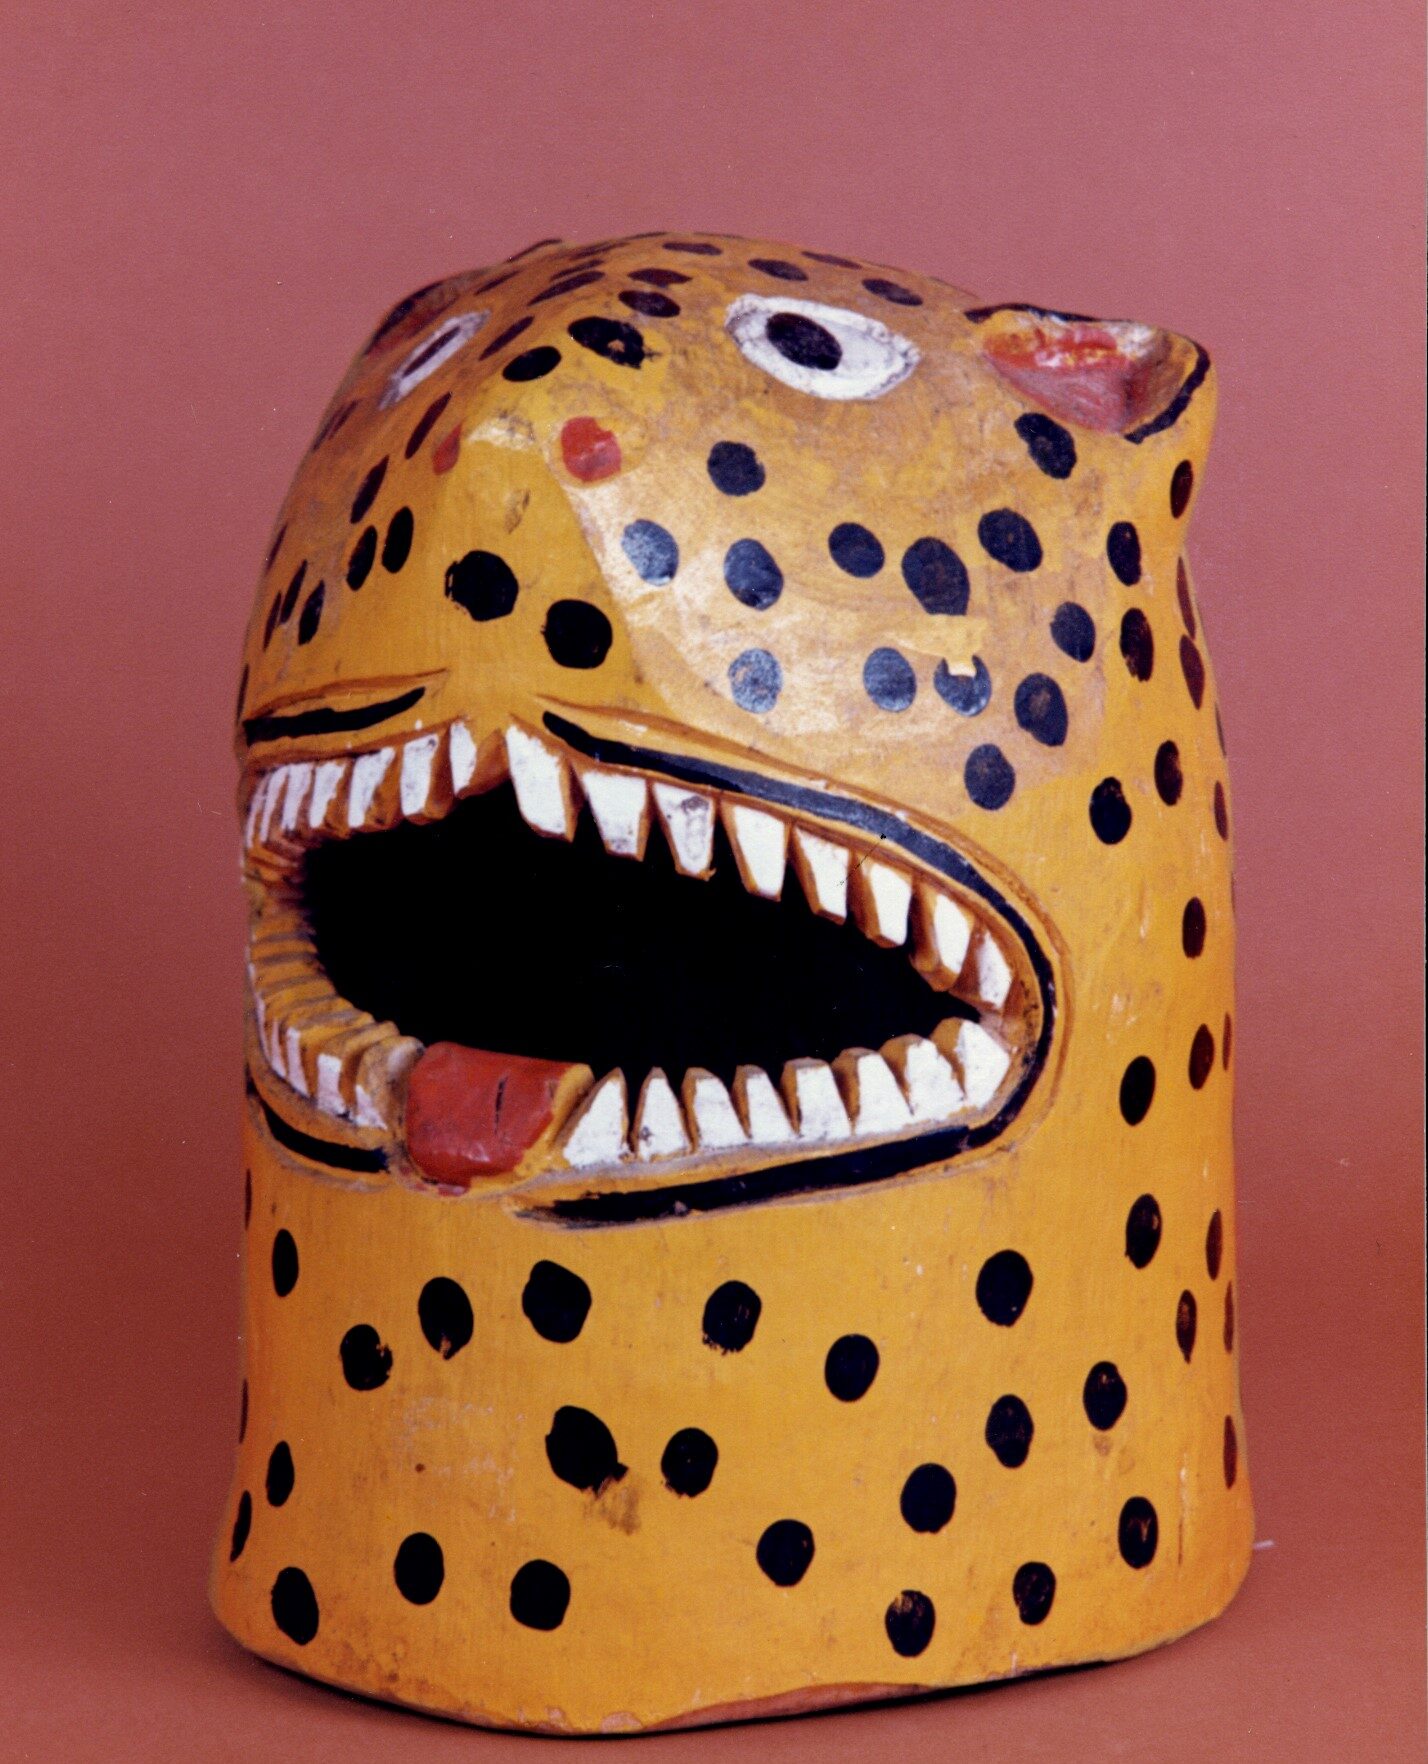 Helmet Mask: Head of el Tigre, paint on wood, 10 inches, region: Guerrero, Althouse Collection